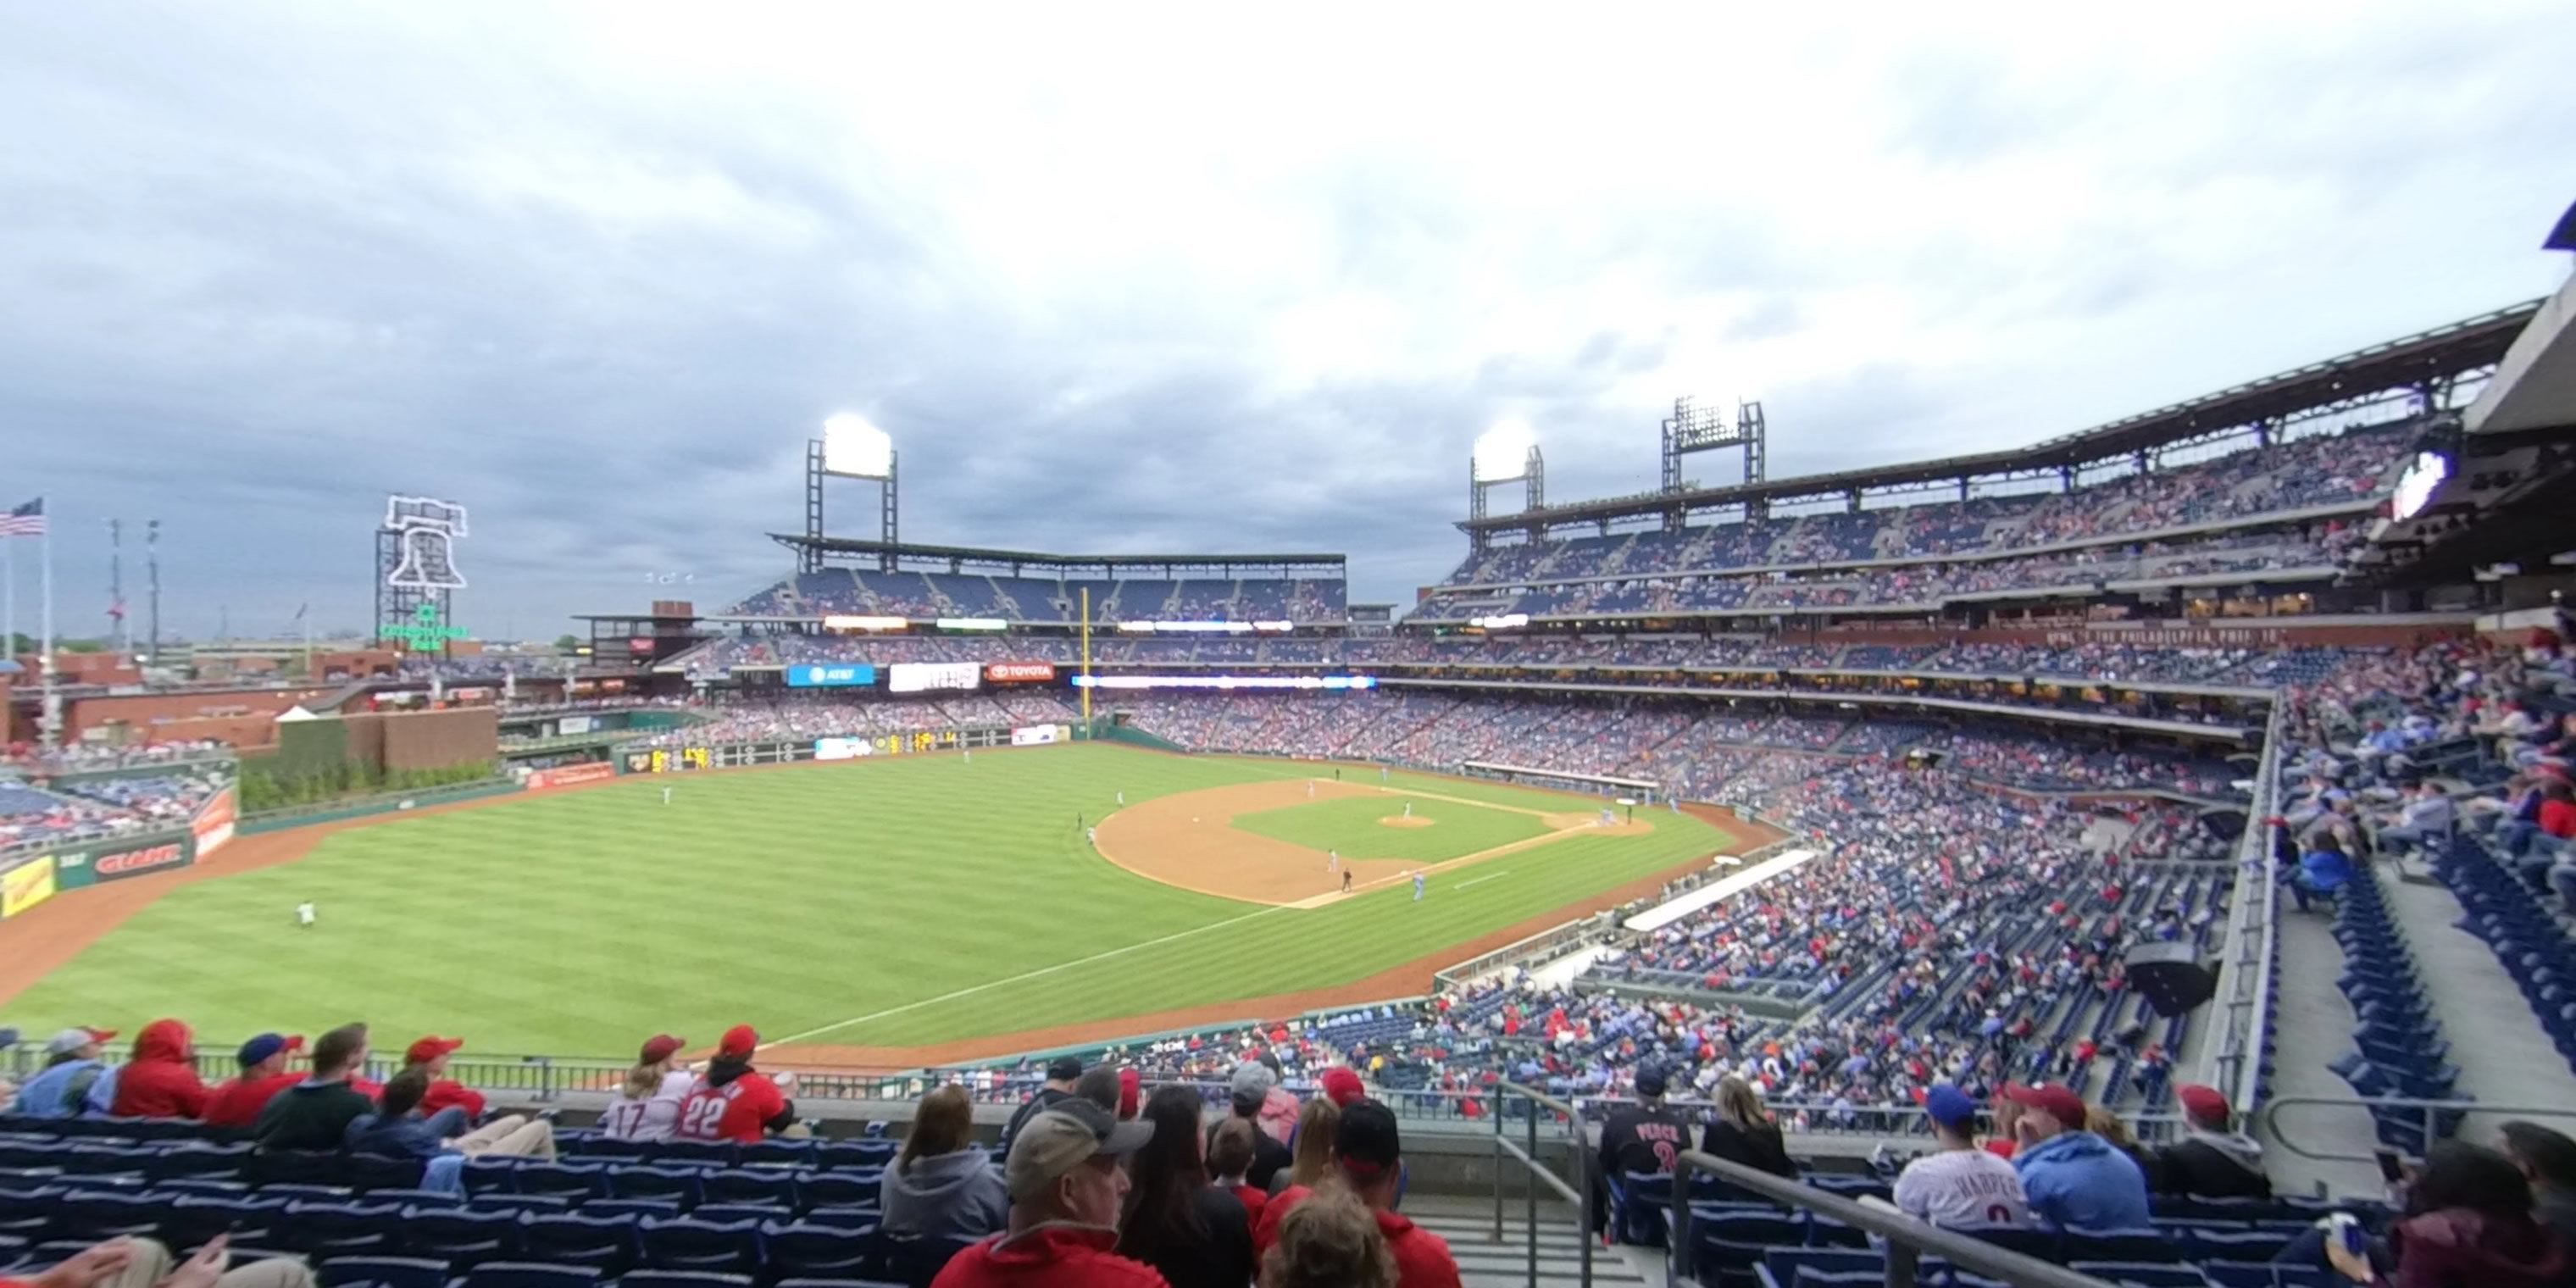 section 232 panoramic seat view  for baseball - citizens bank park